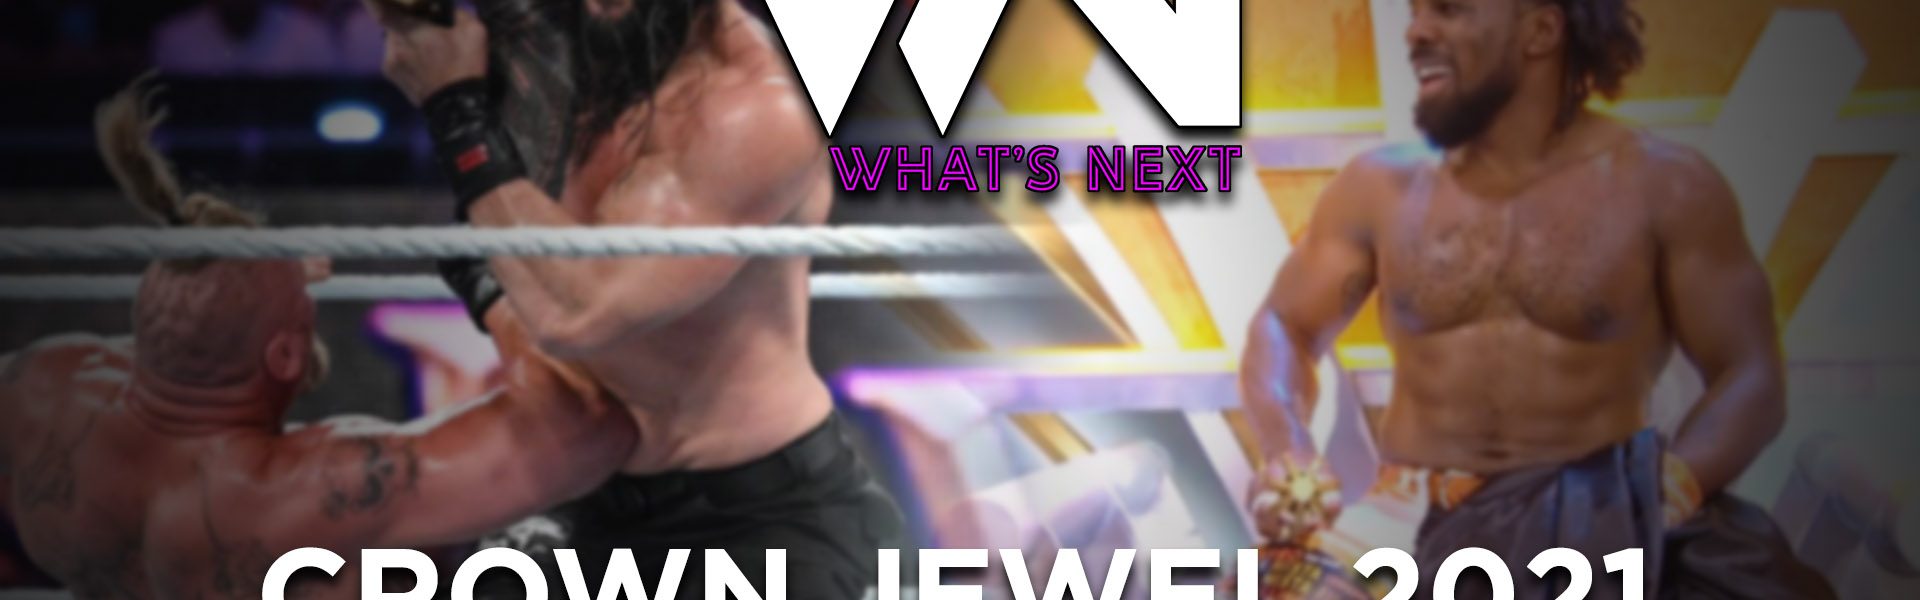 Crown Jewel 2021 Review - What's Next #140